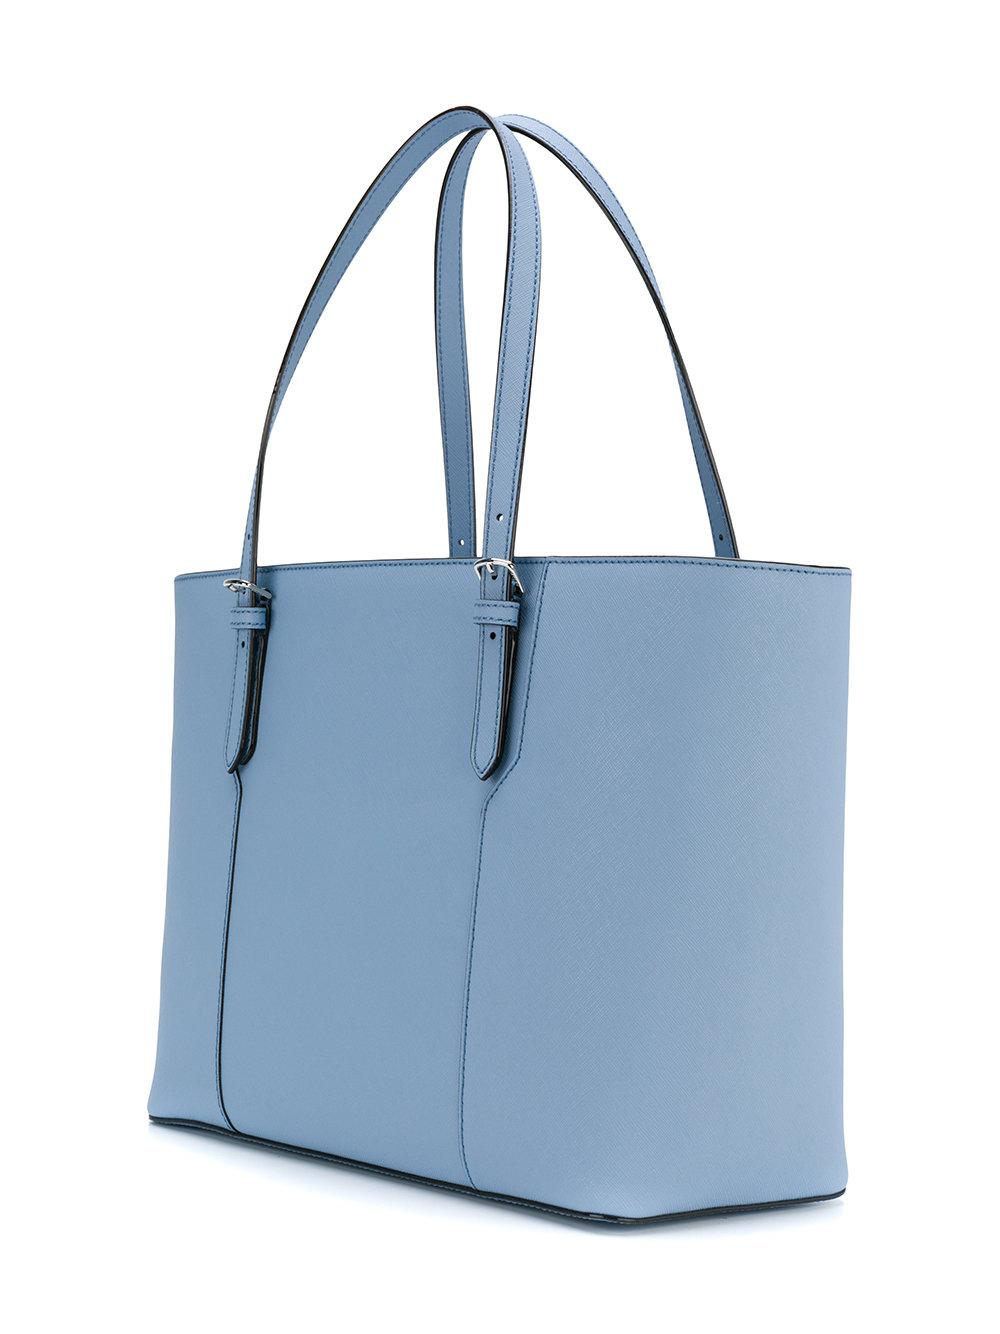 Bally Leather Supra Small Tote in Blue - Lyst